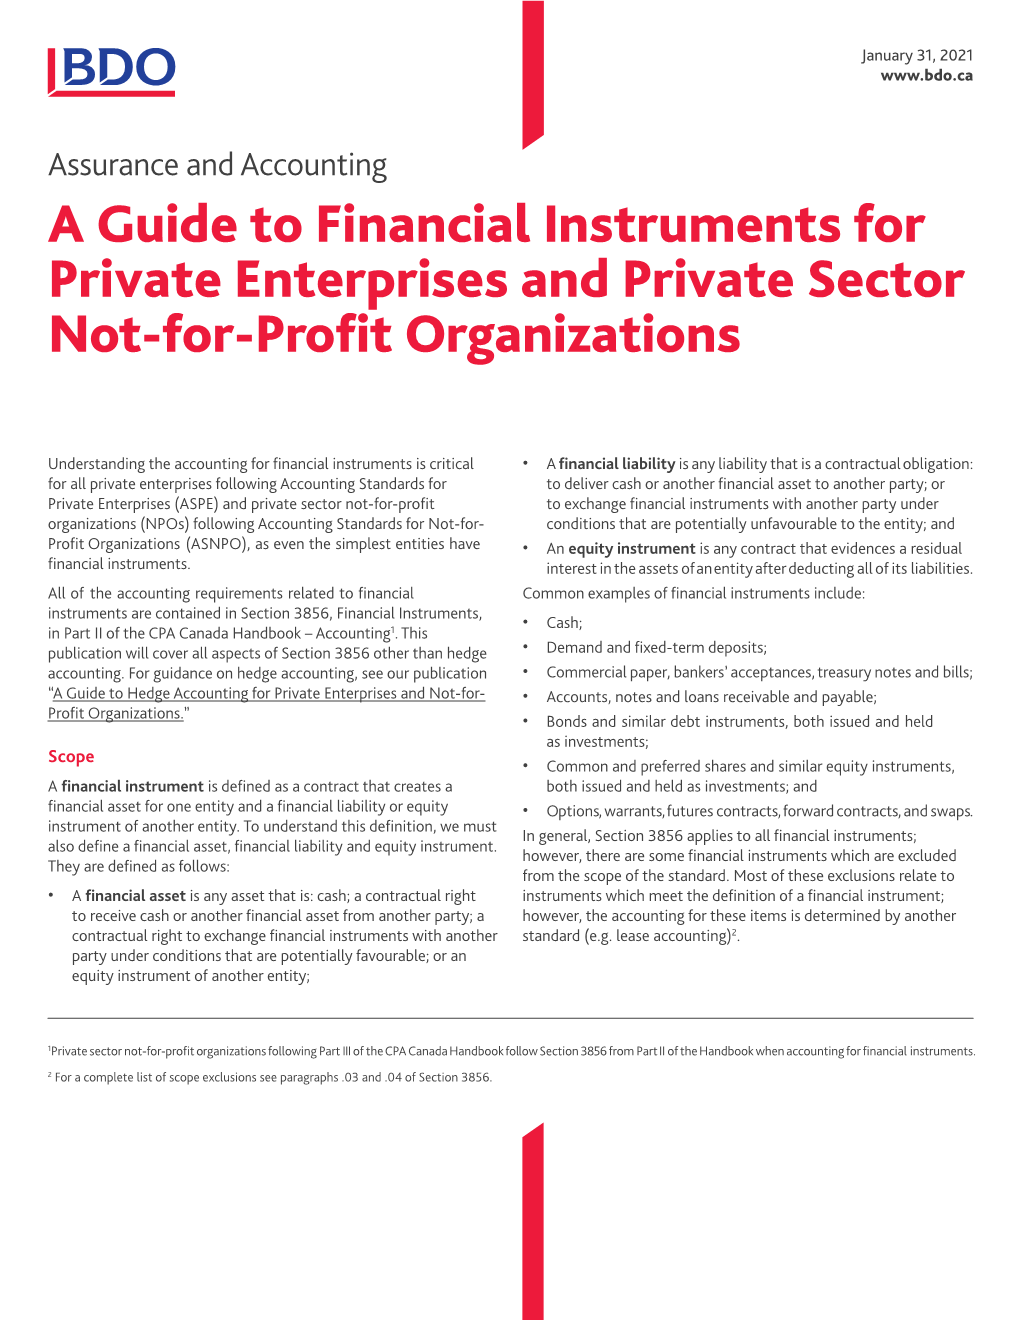 A Guide to Financial Instruments for Private Enterprises and Private Sector Not-For-Profit Organizations